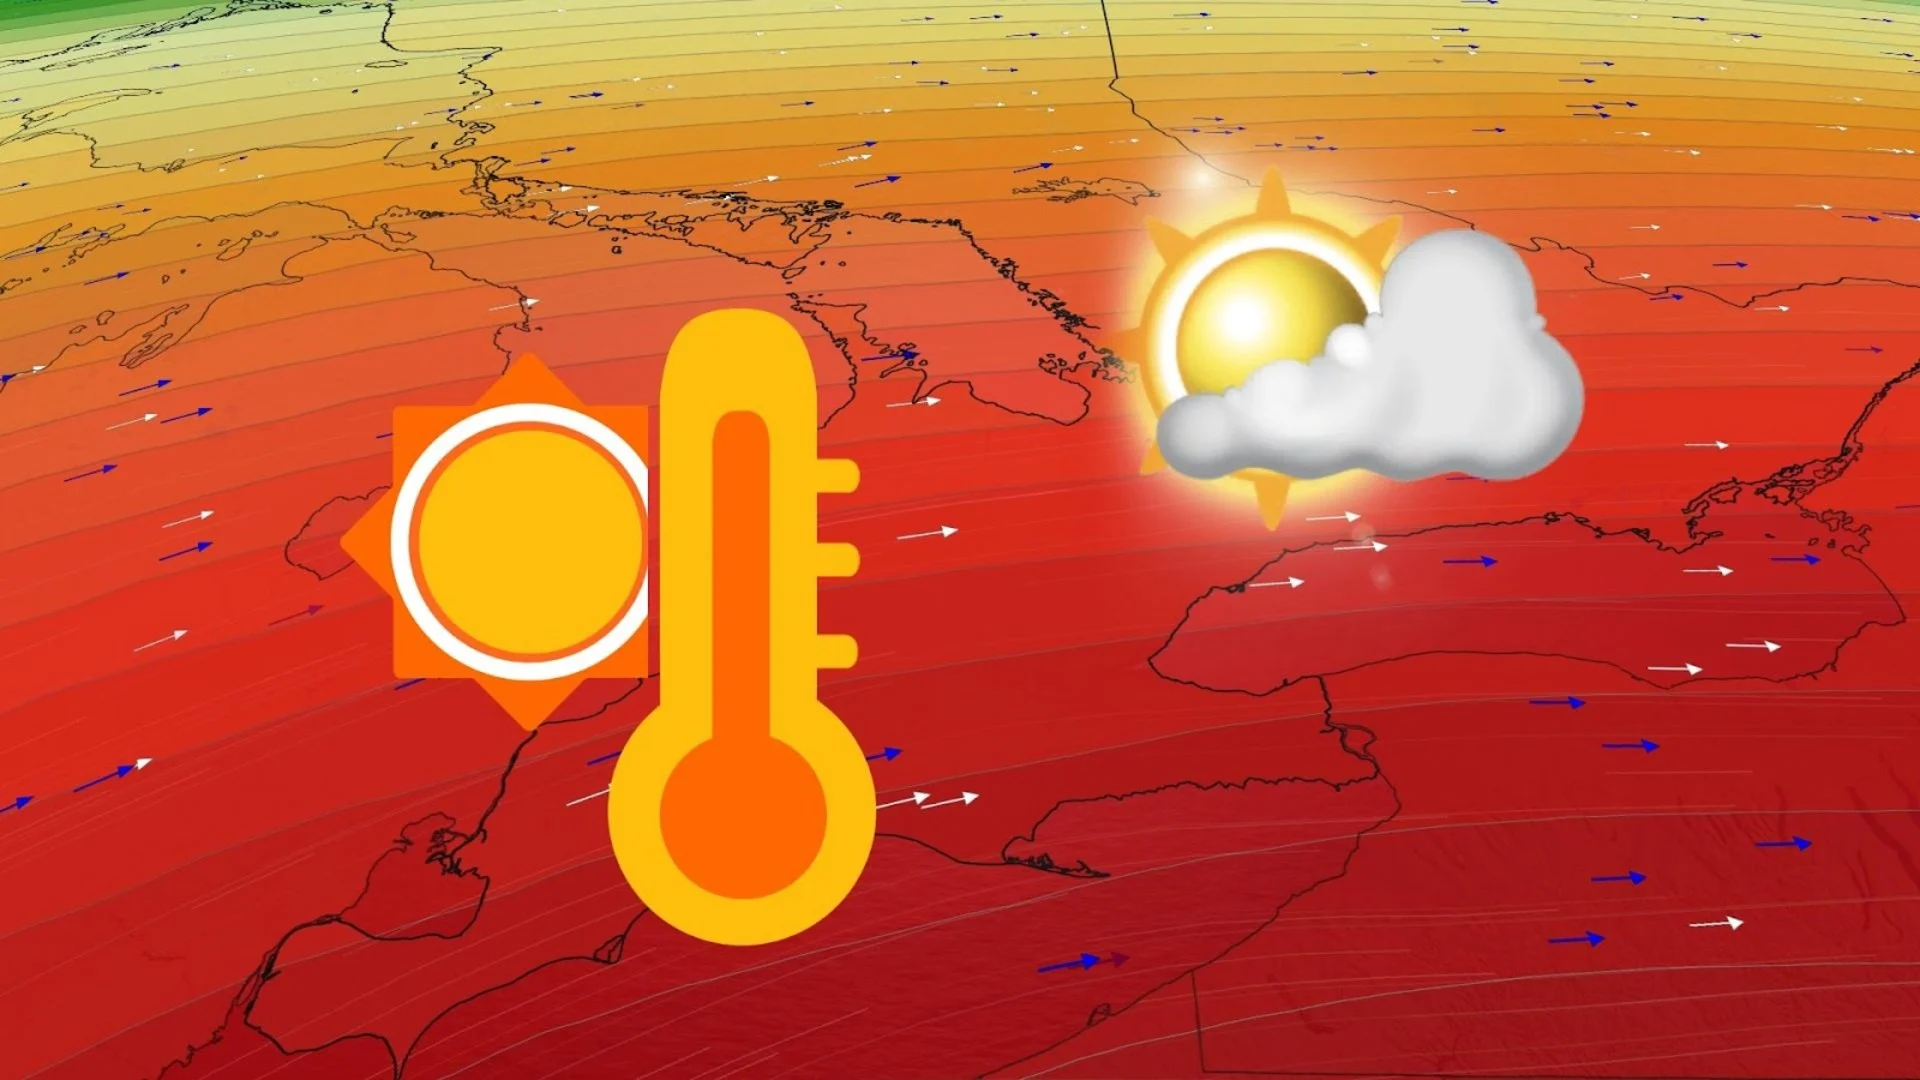 Southern Ontario's chilly spell ends with toasty October finish